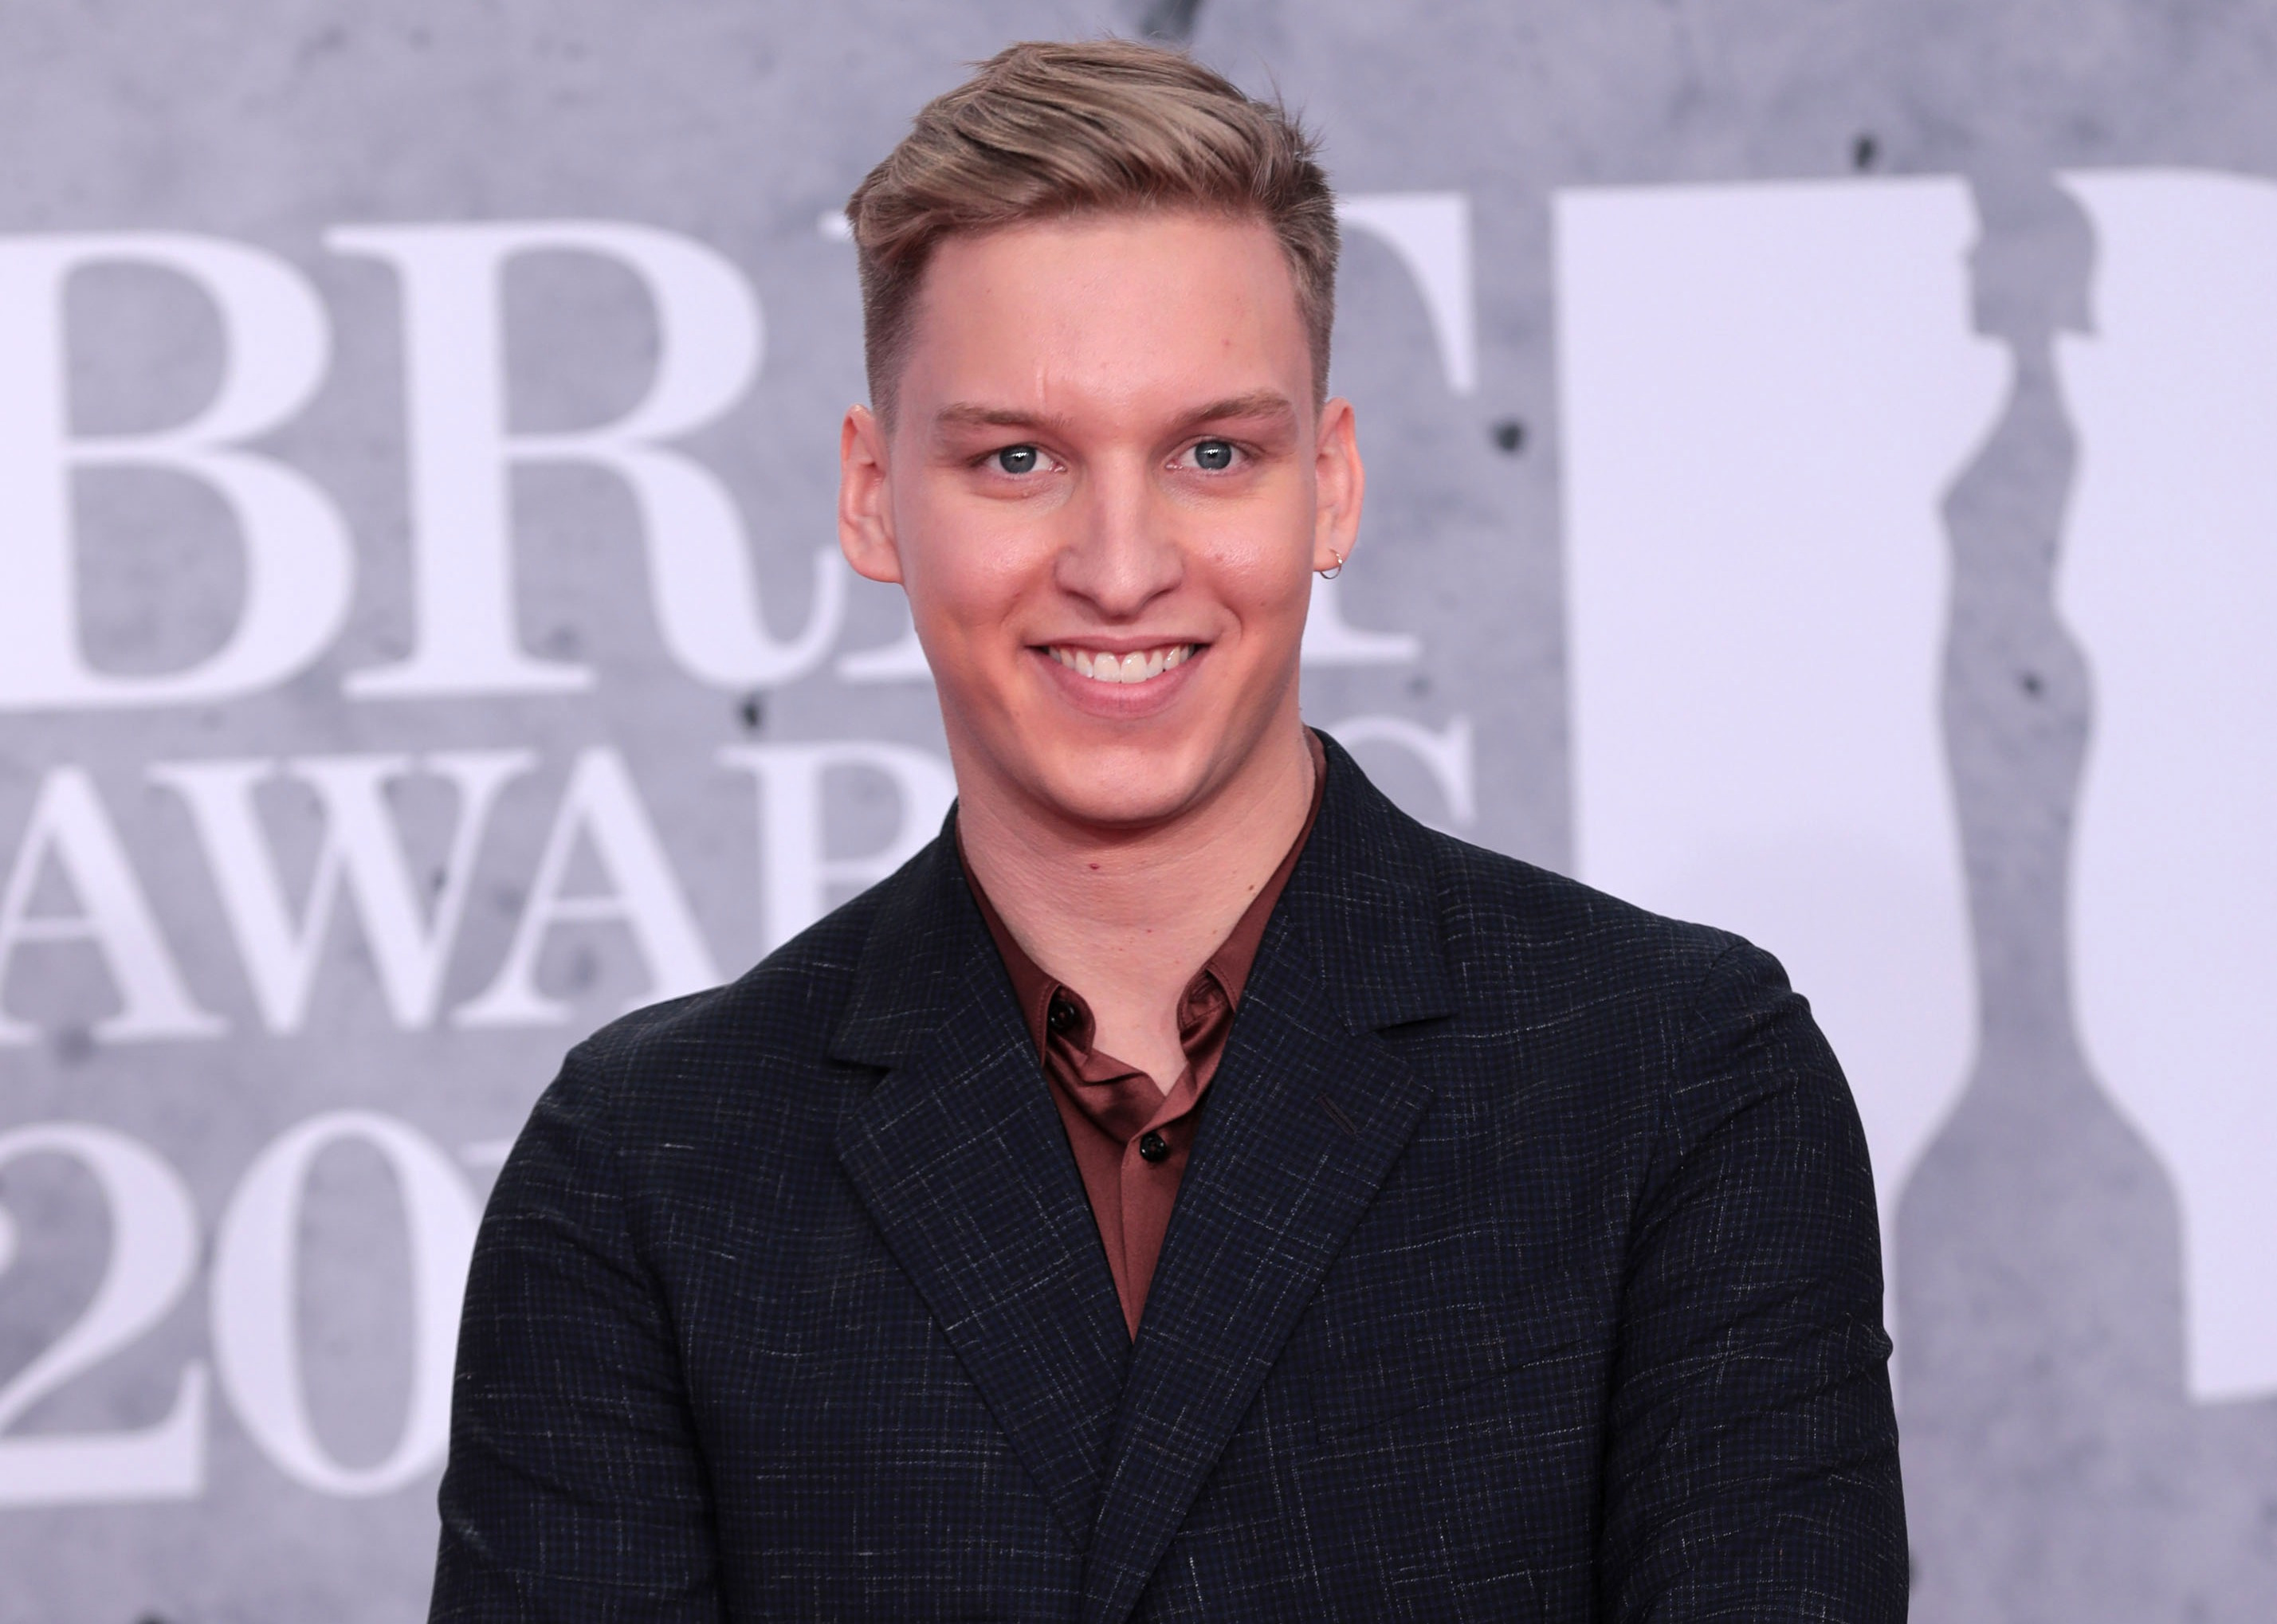 Shotgun singer George Ezra claims some big names are not entirely human